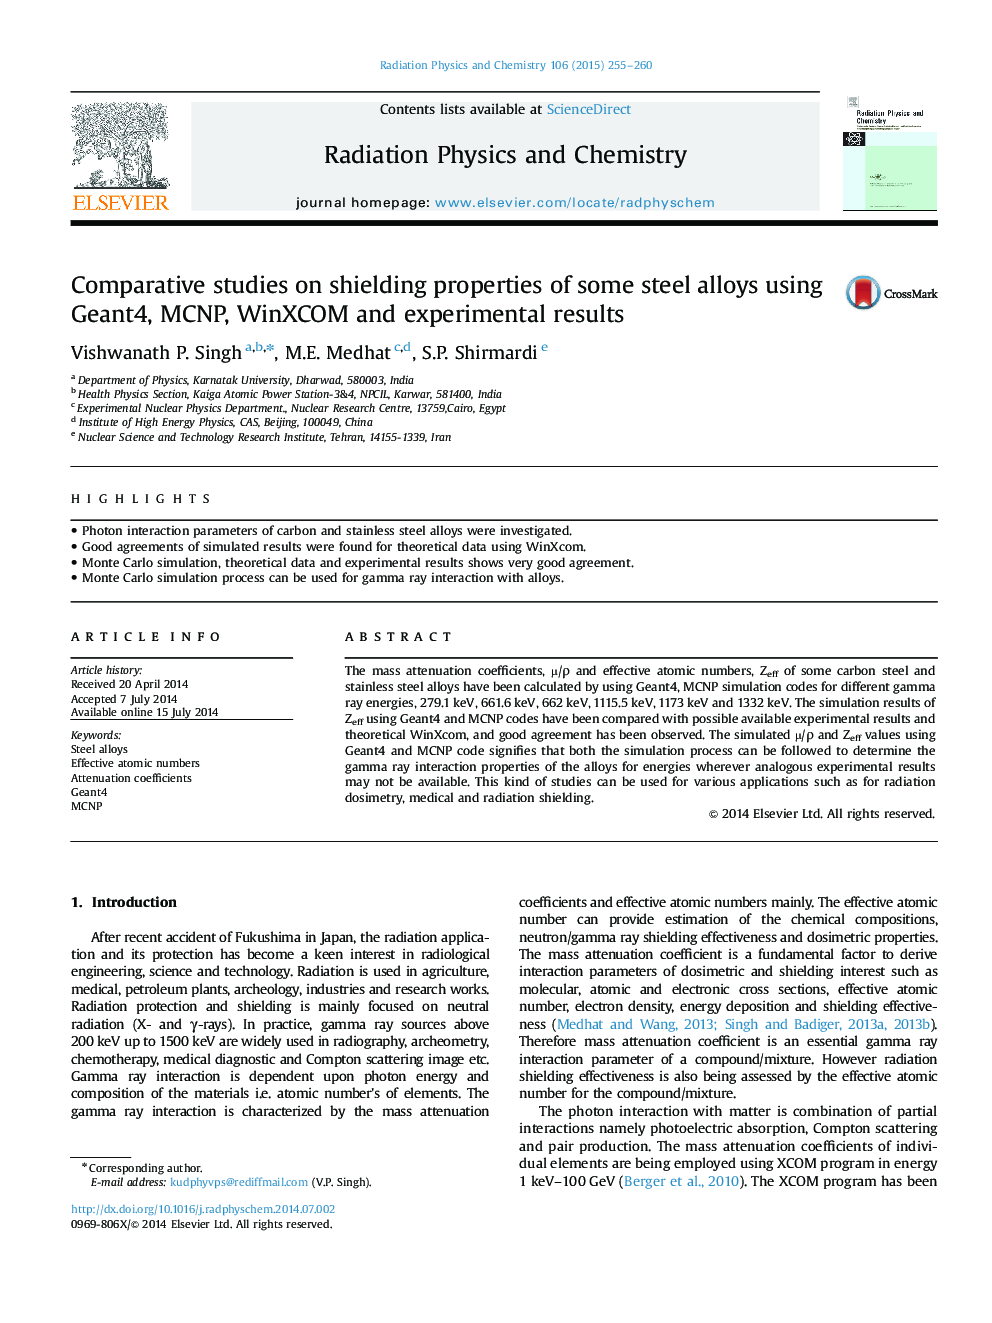 Comparative studies on shielding properties of some steel alloys using Geant4, MCNP, WinXCOM and experimental results